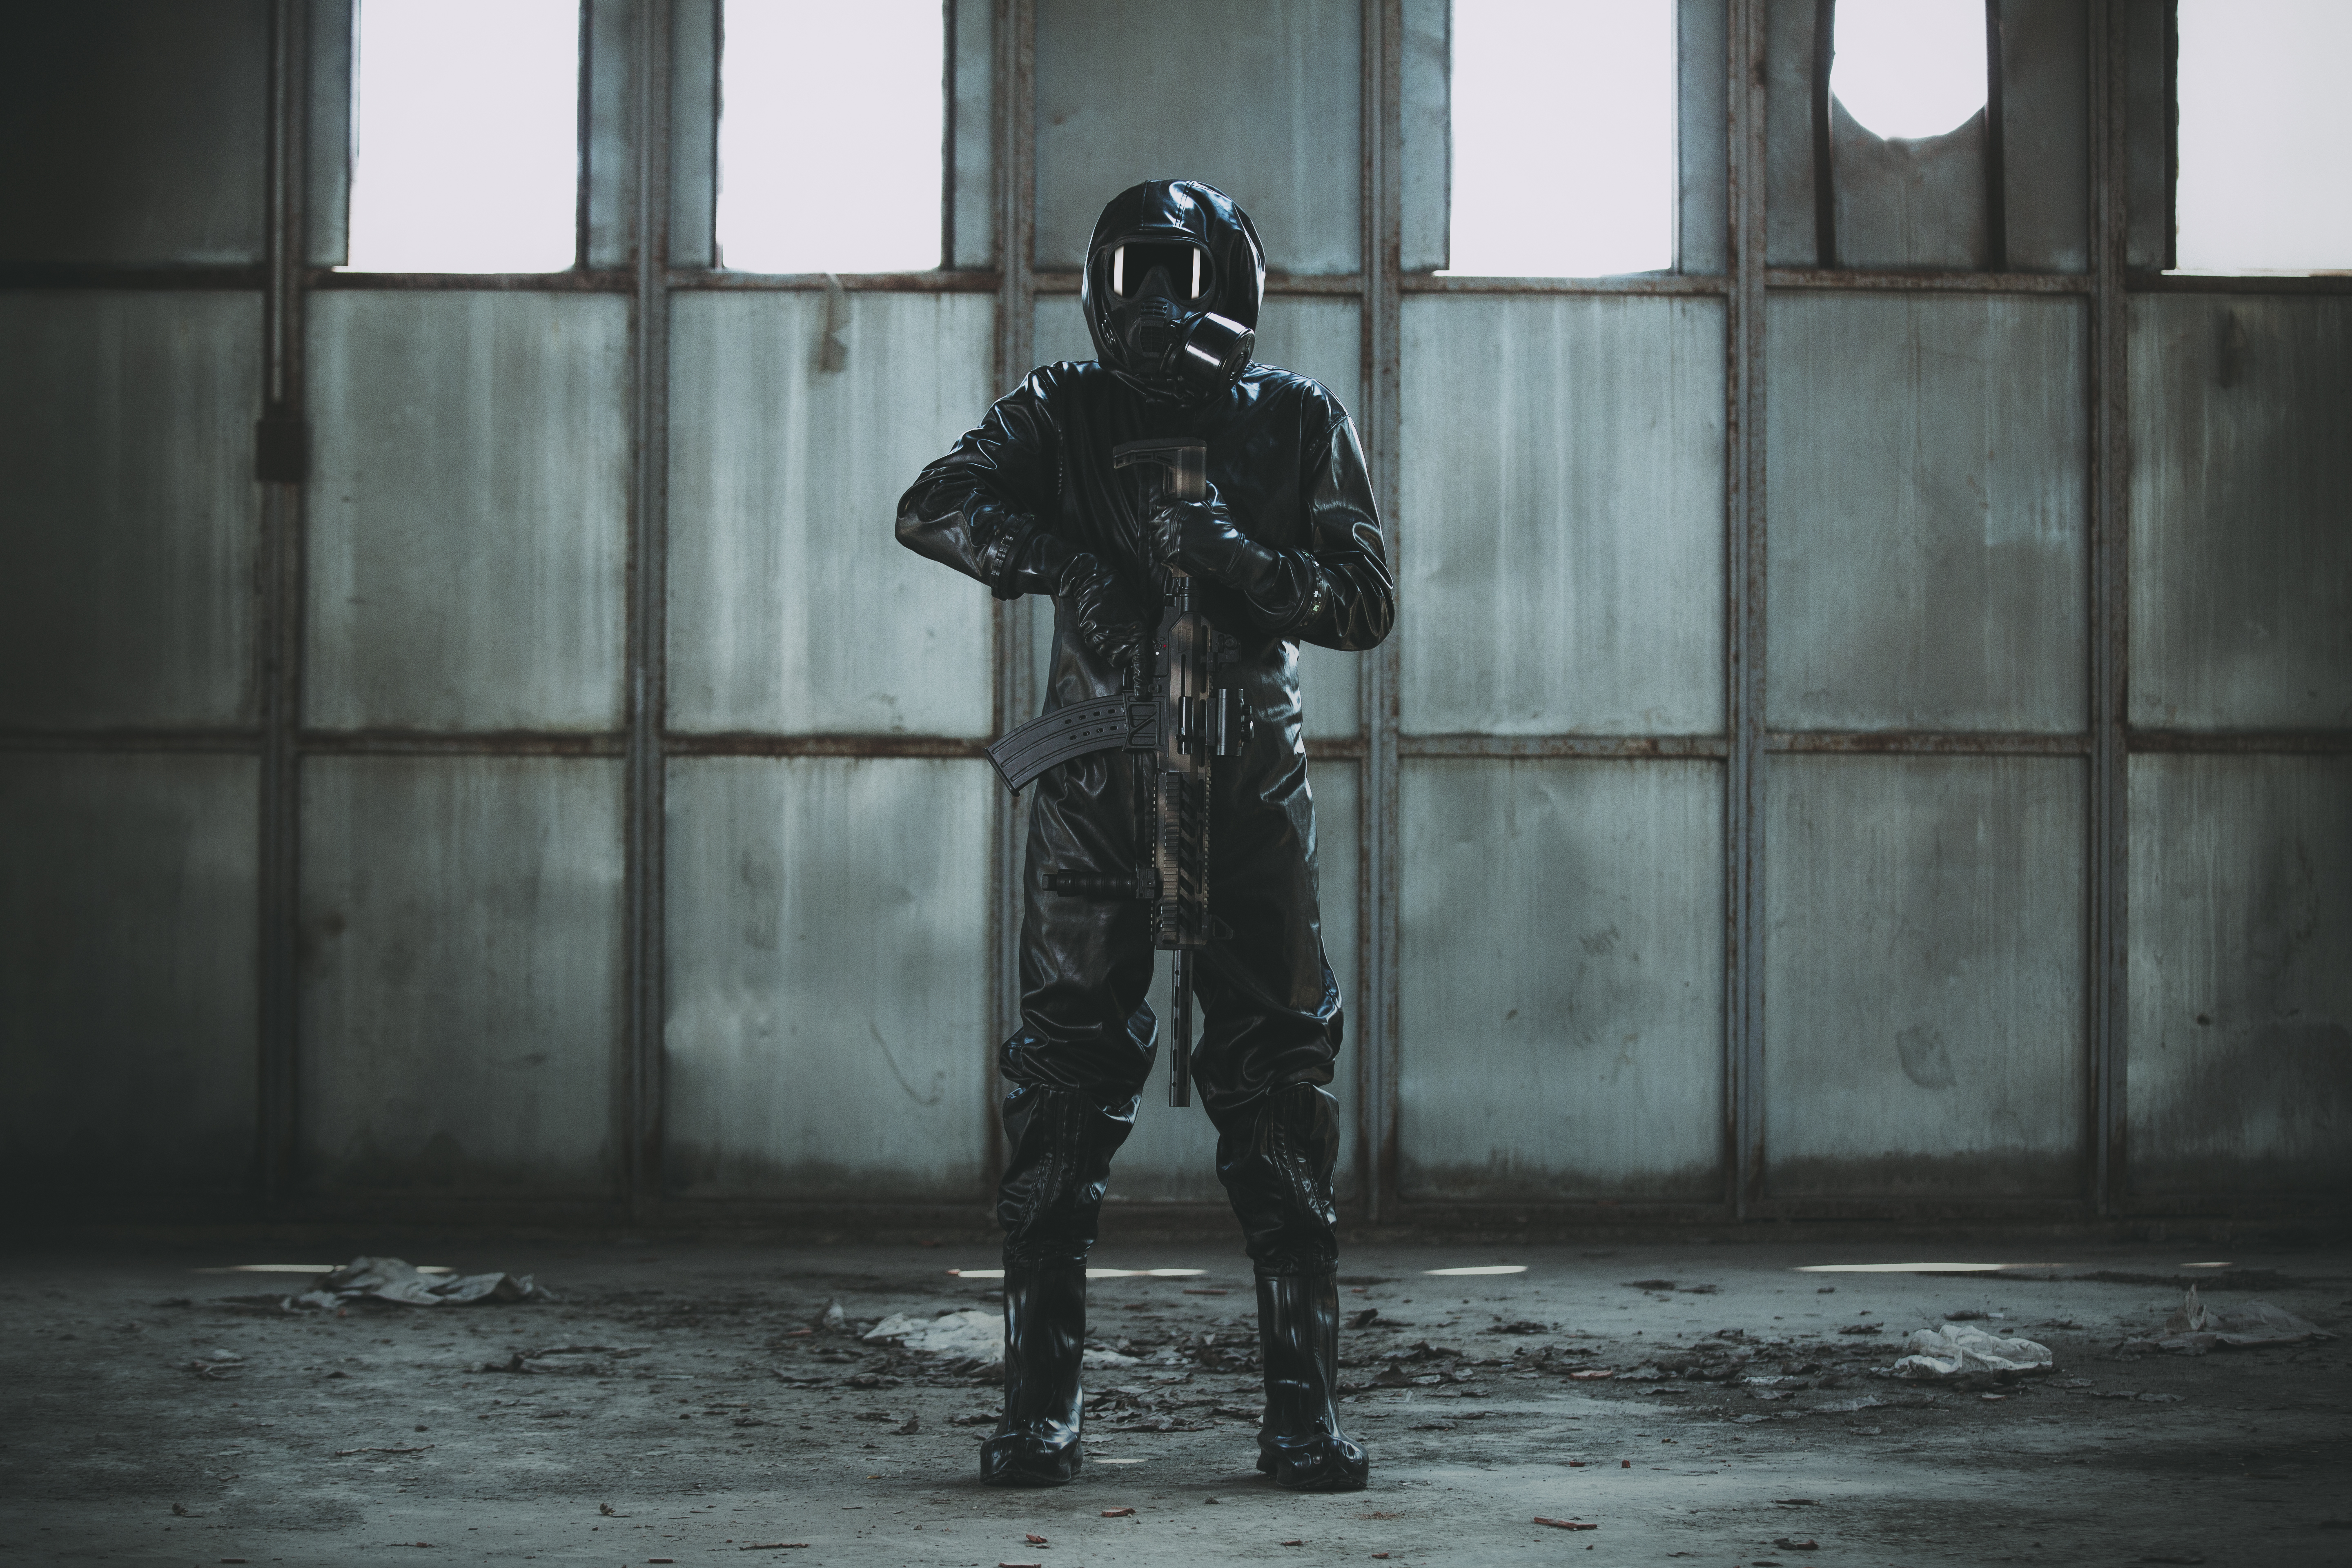 Type A & B CBRN Protective Suit